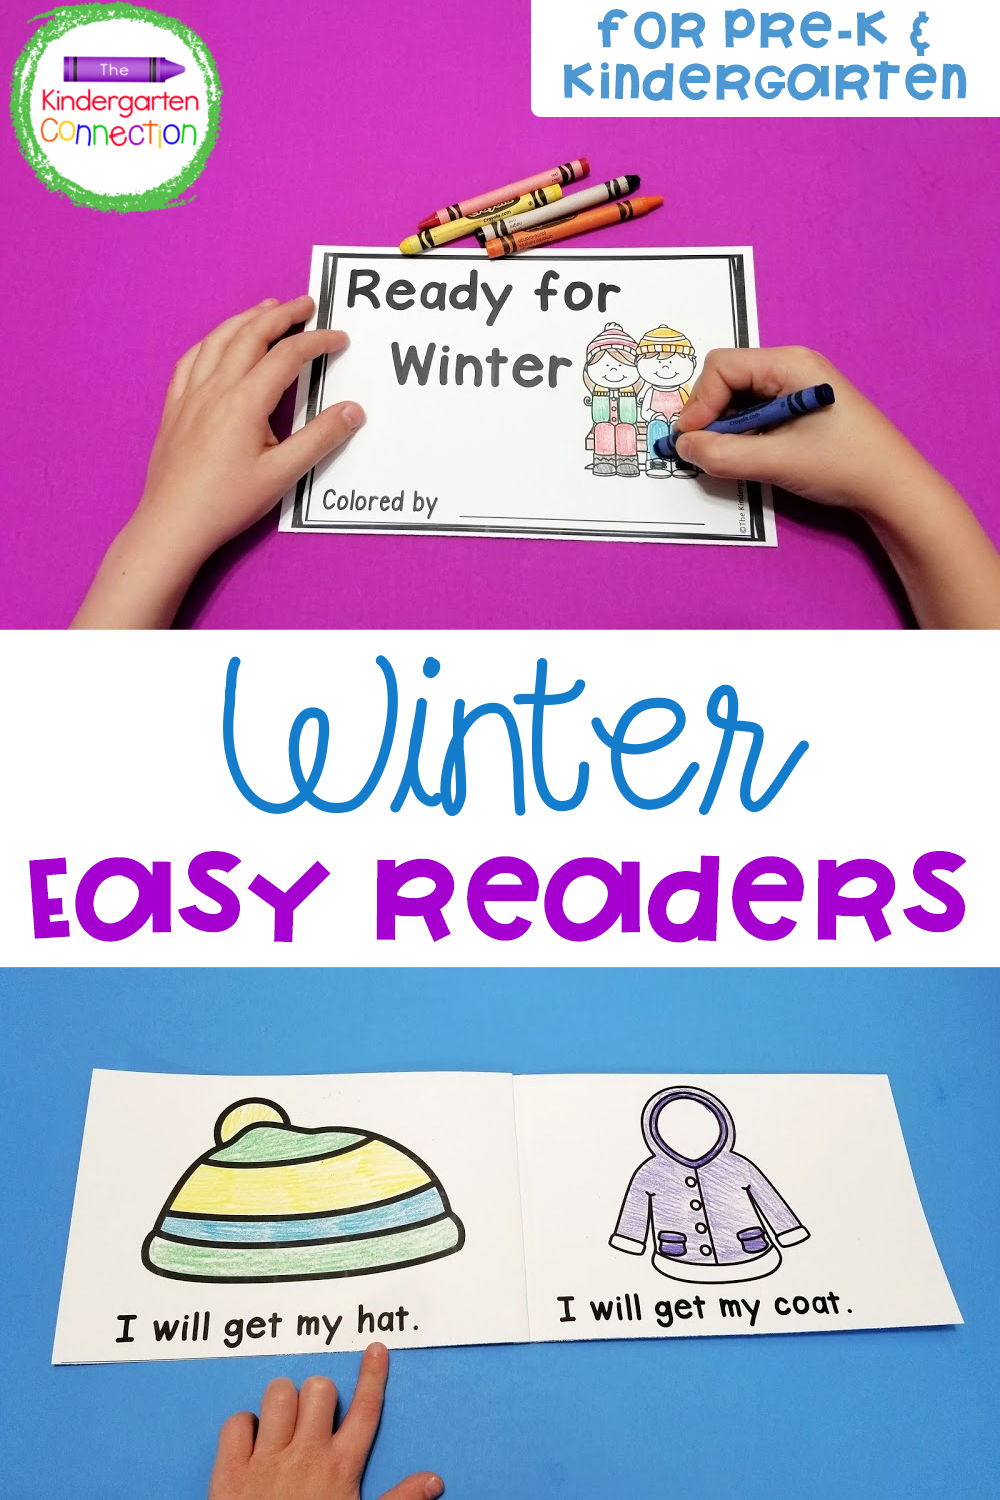 These printable Winter Emergent Readers are great for early readers to use as guided reading books or take home books in Kindergarten!